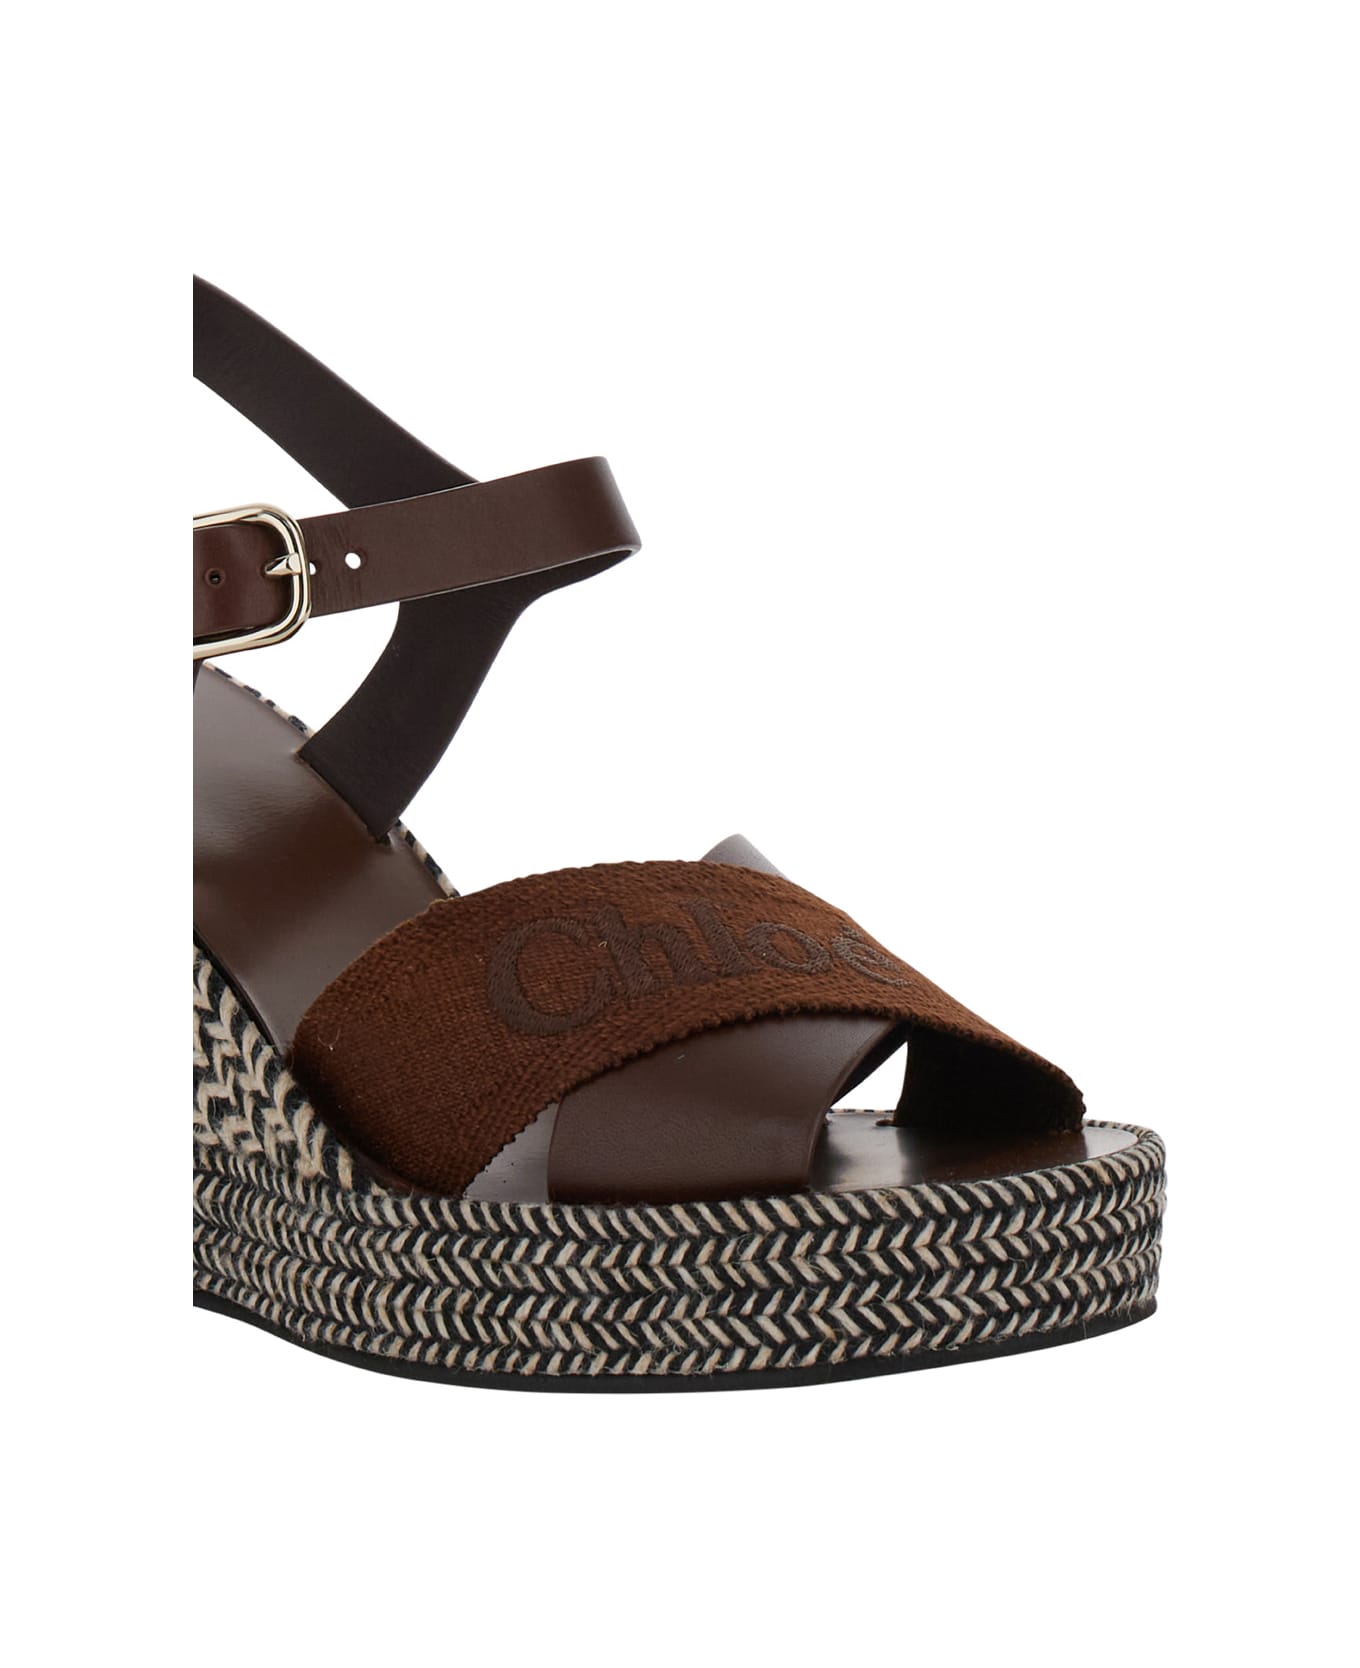 Chloé Espadrillas Sandals With Wedge In Leather And Jute - Brown